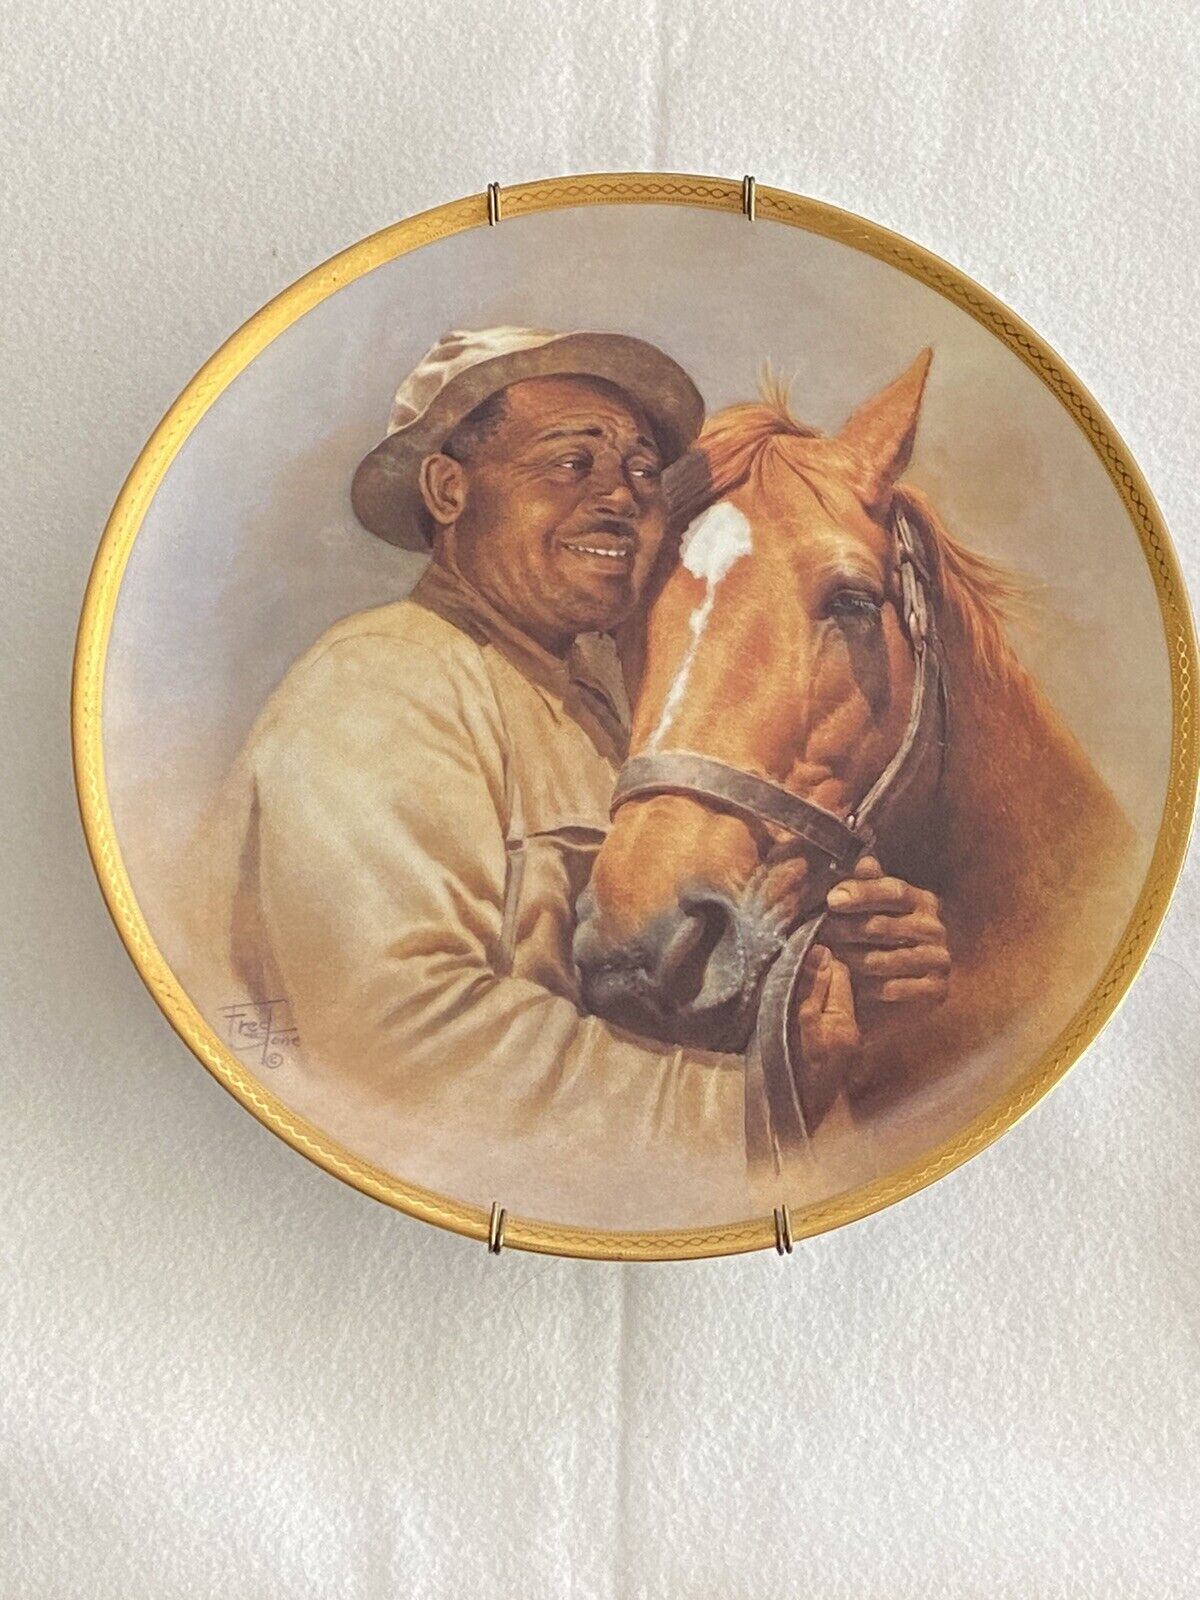 Man o' War & Will Harbut by Fred Stone porcelain plate gold trim #4260 of 9,500